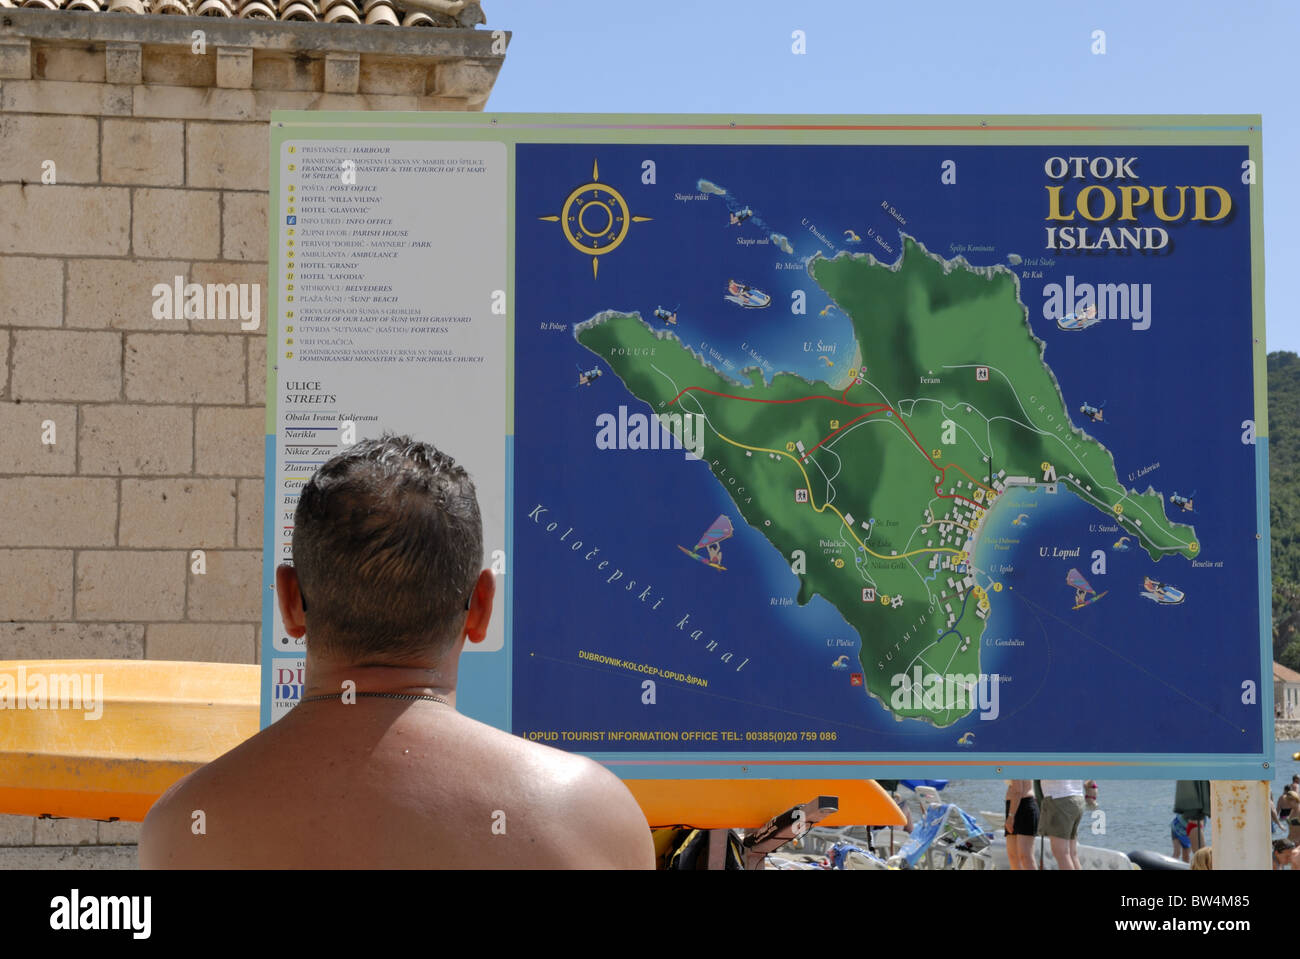 A visitor information board near the beach of the Lopud Village on the Lopud Island, Elafiti Islands. The Lopud Island is the... Stock Photo